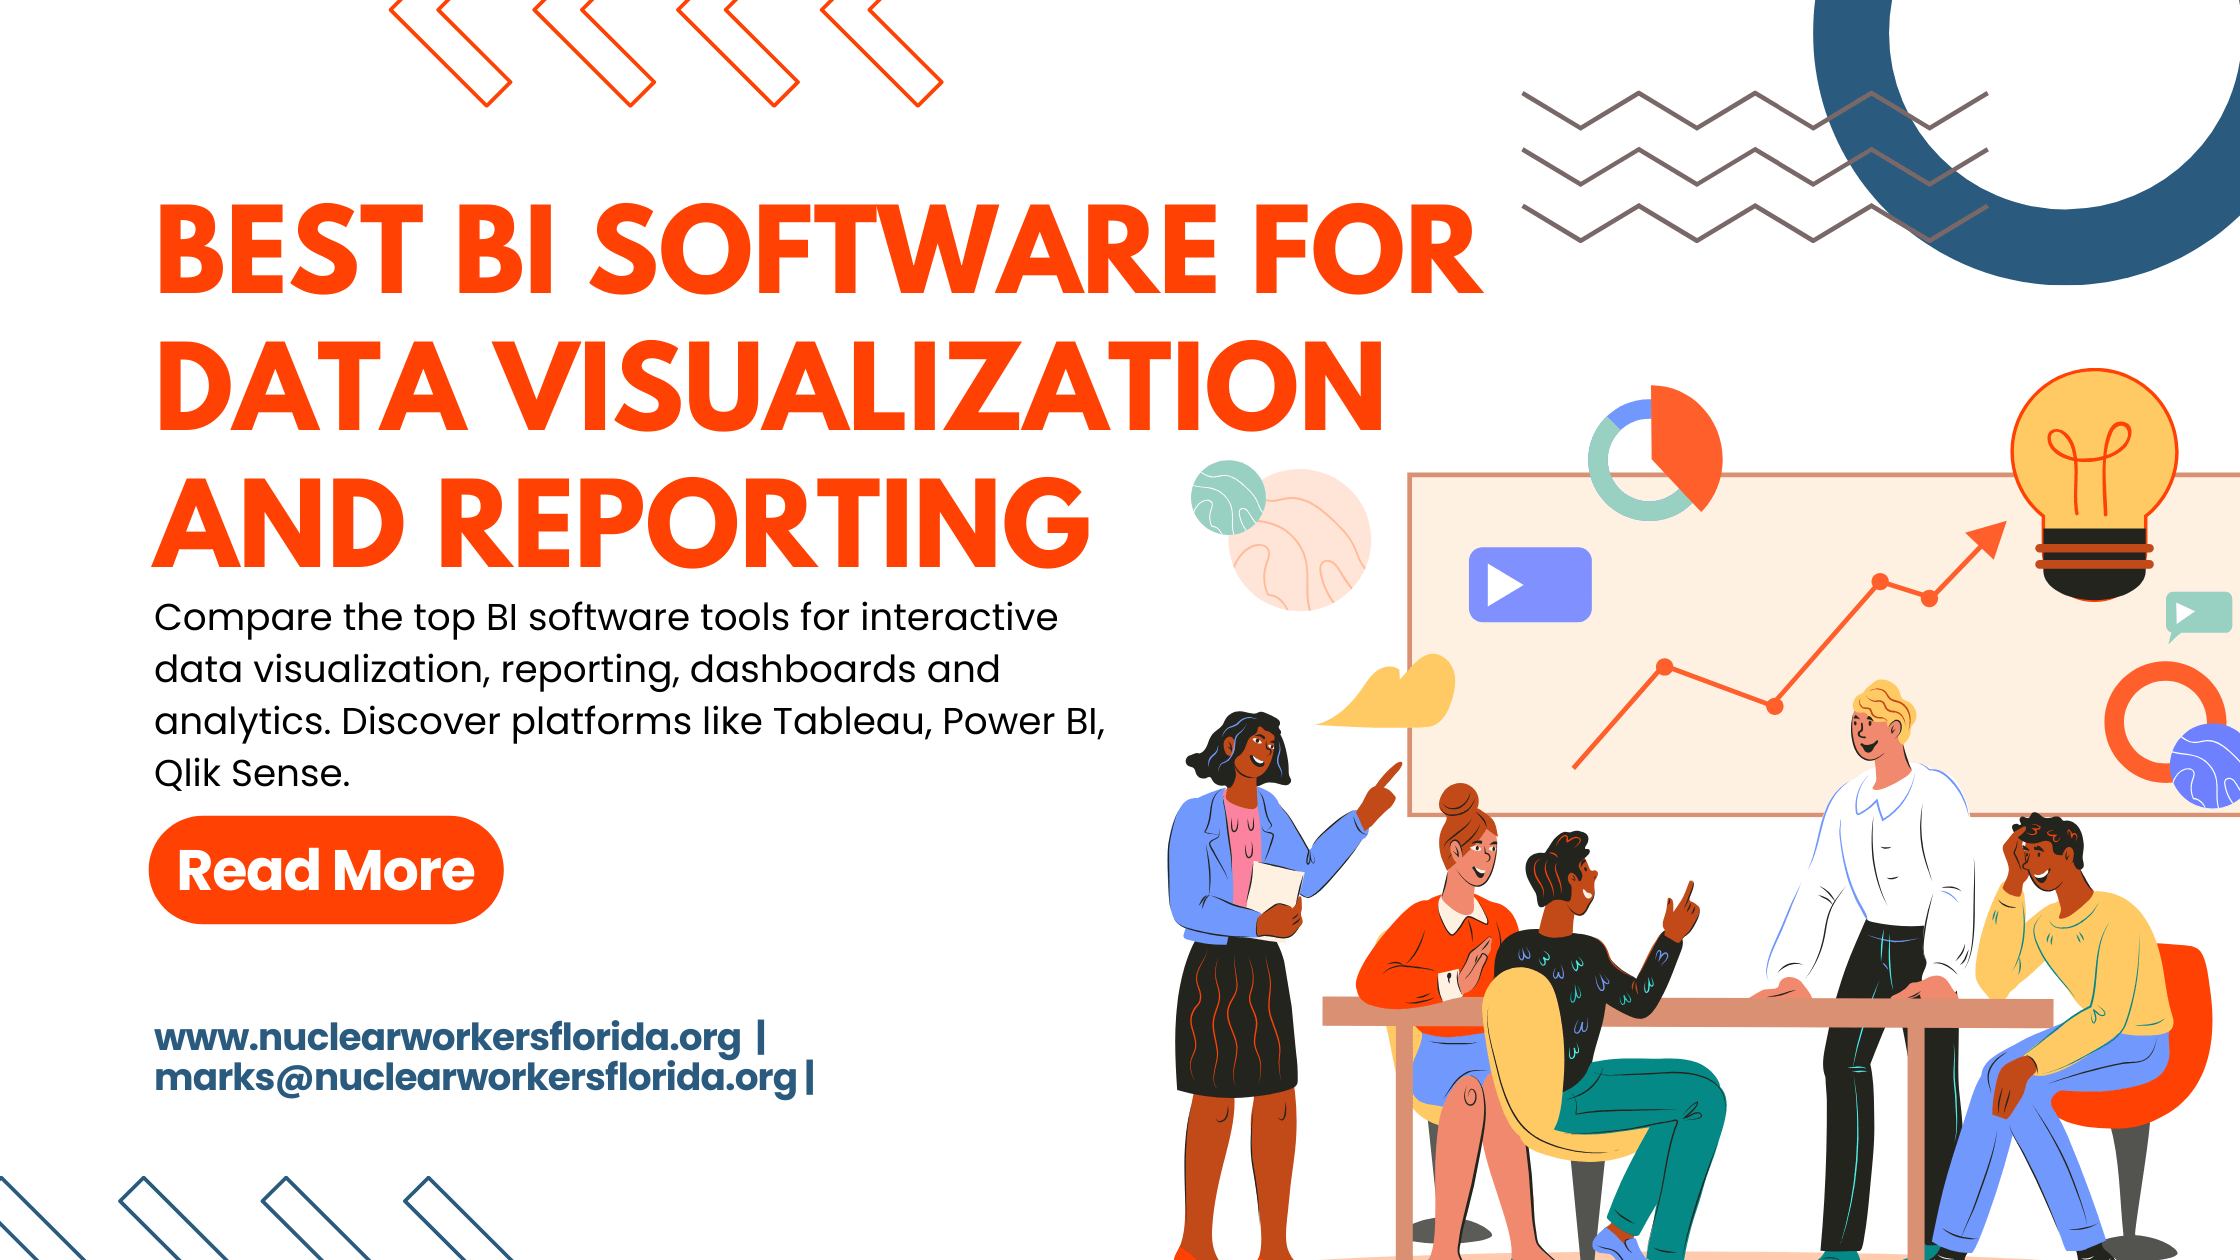 Best BI Software for Data Visualization and Reporting